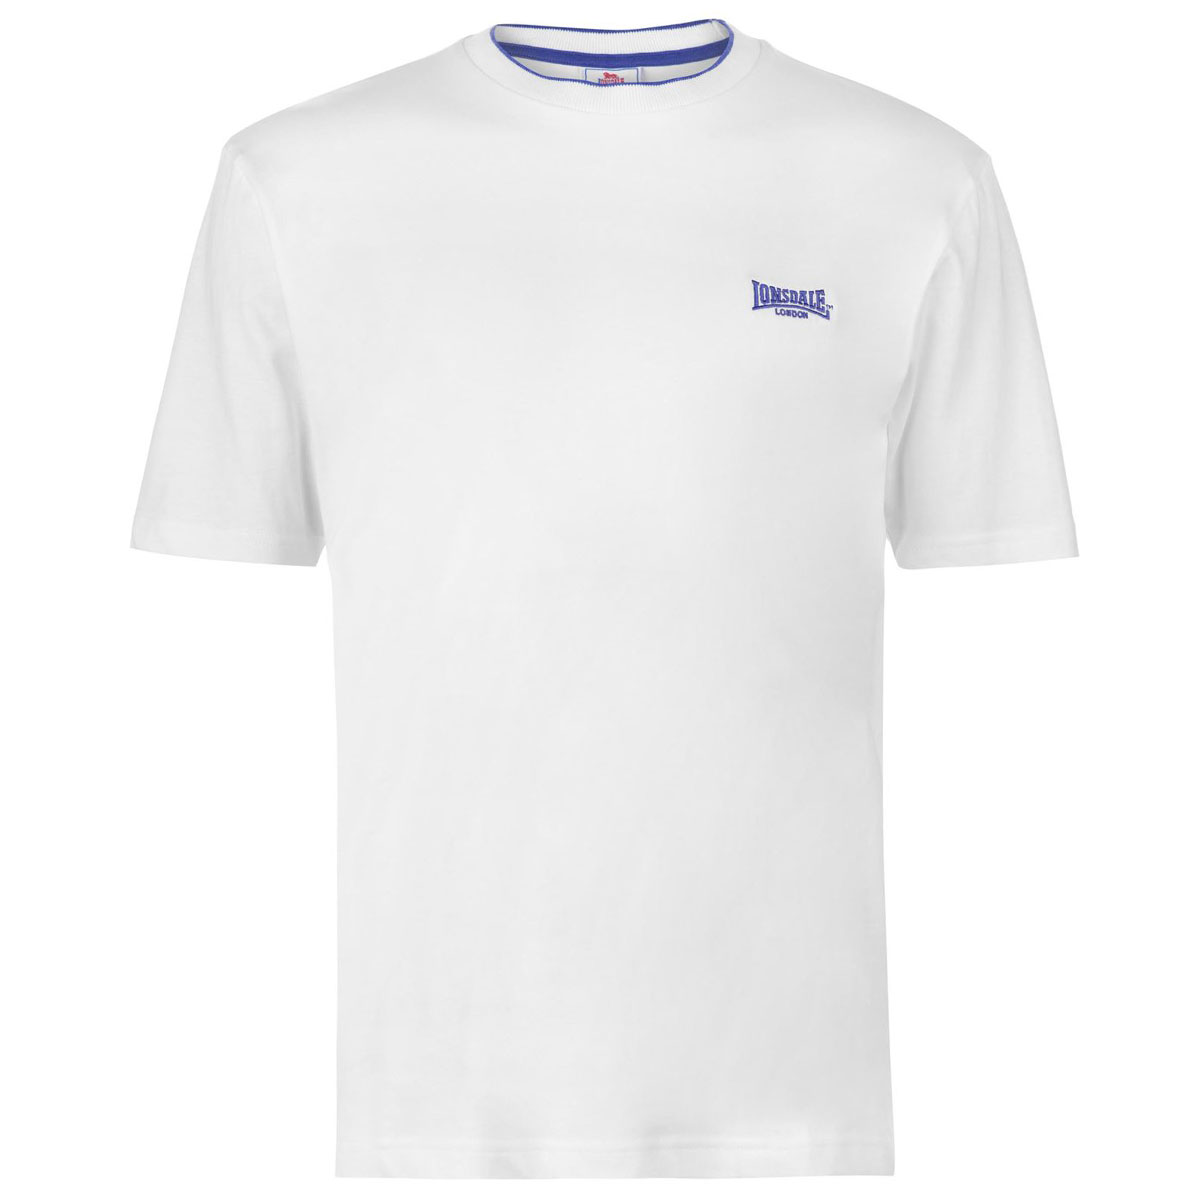 Lonsdale Men's Tipped Tee - White, L